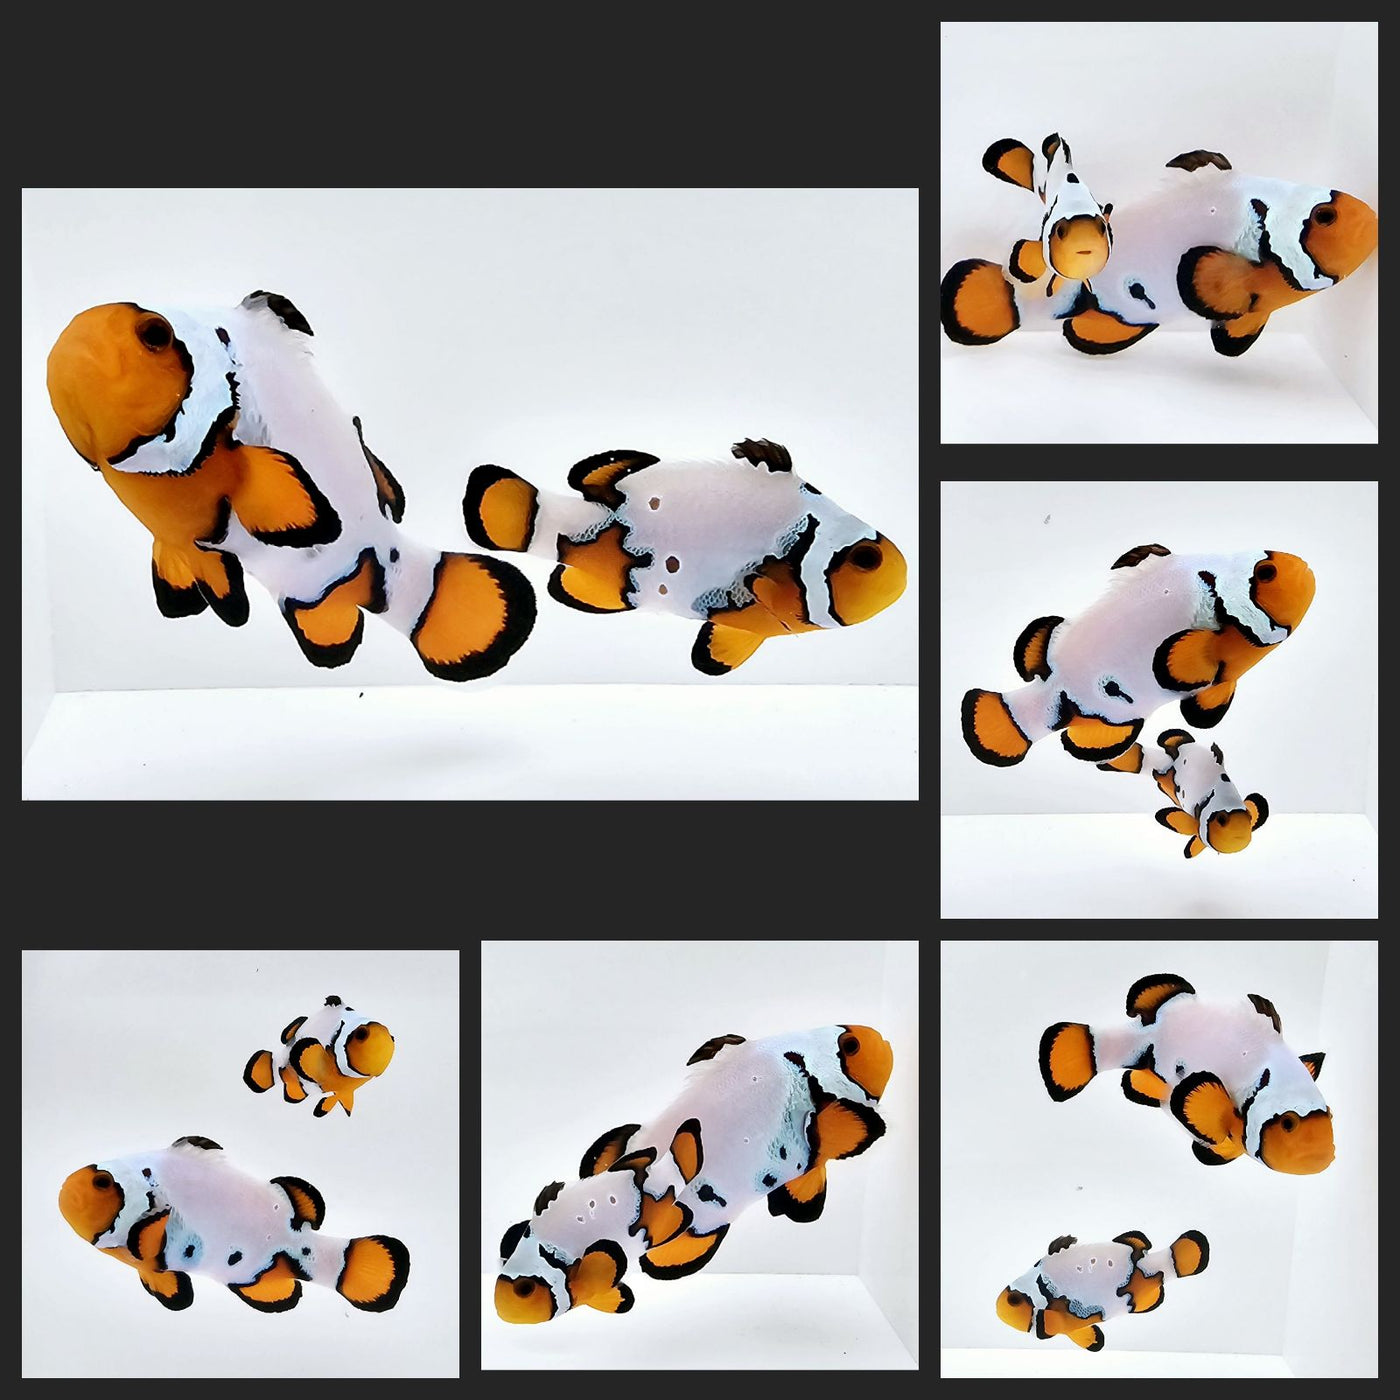 Clownfish Bonded Pair Black Ice Extreme / Special